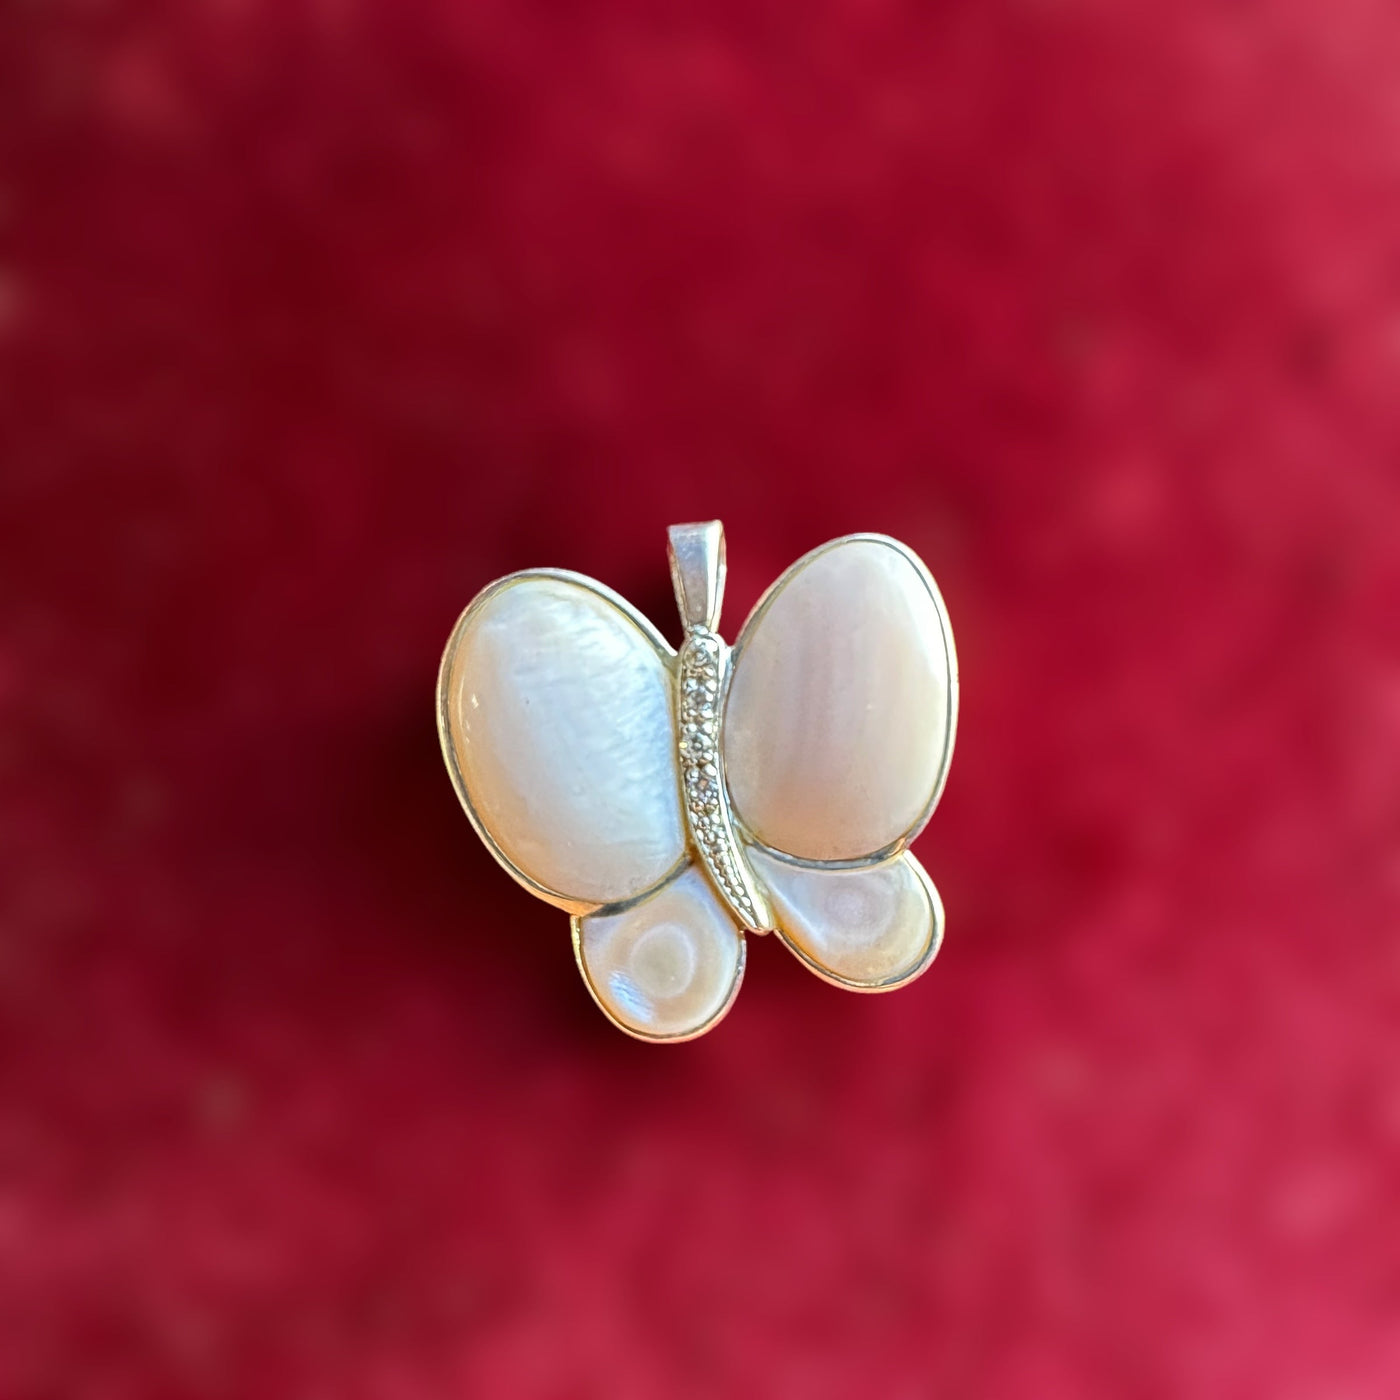 Mother of Pearl and Glass Gem Sterling Silver Butterfly Brooch / Pendant